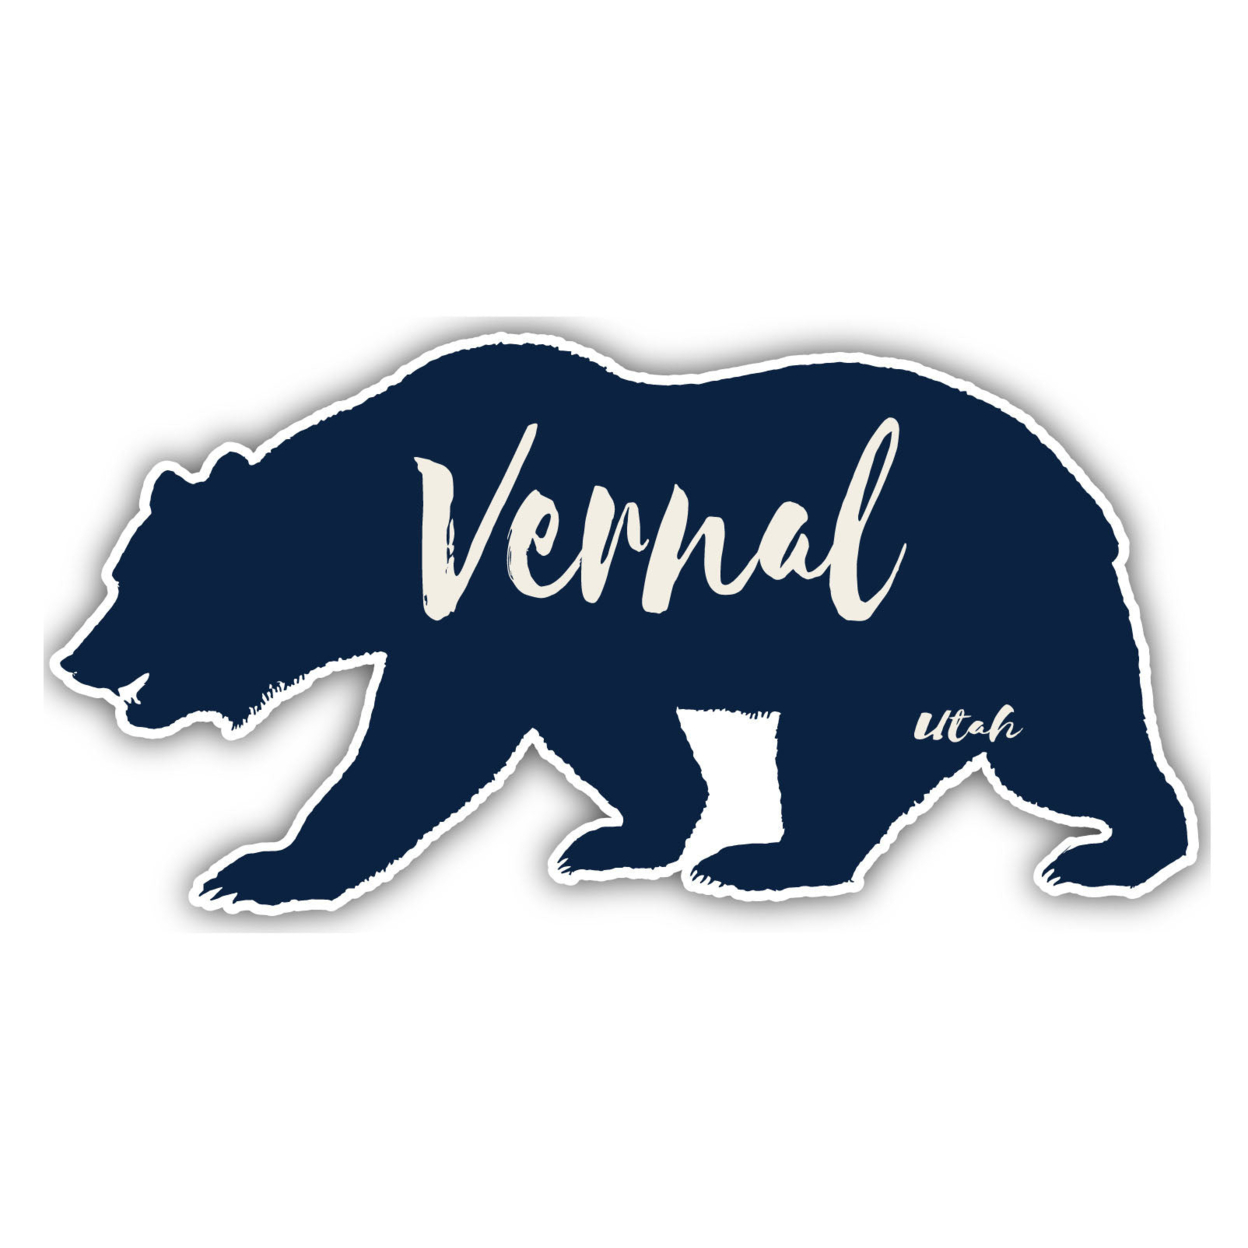 Vernal Utah Souvenir Decorative Stickers (Choose Theme And Size) - Single Unit, 2-Inch, Great Outdoors